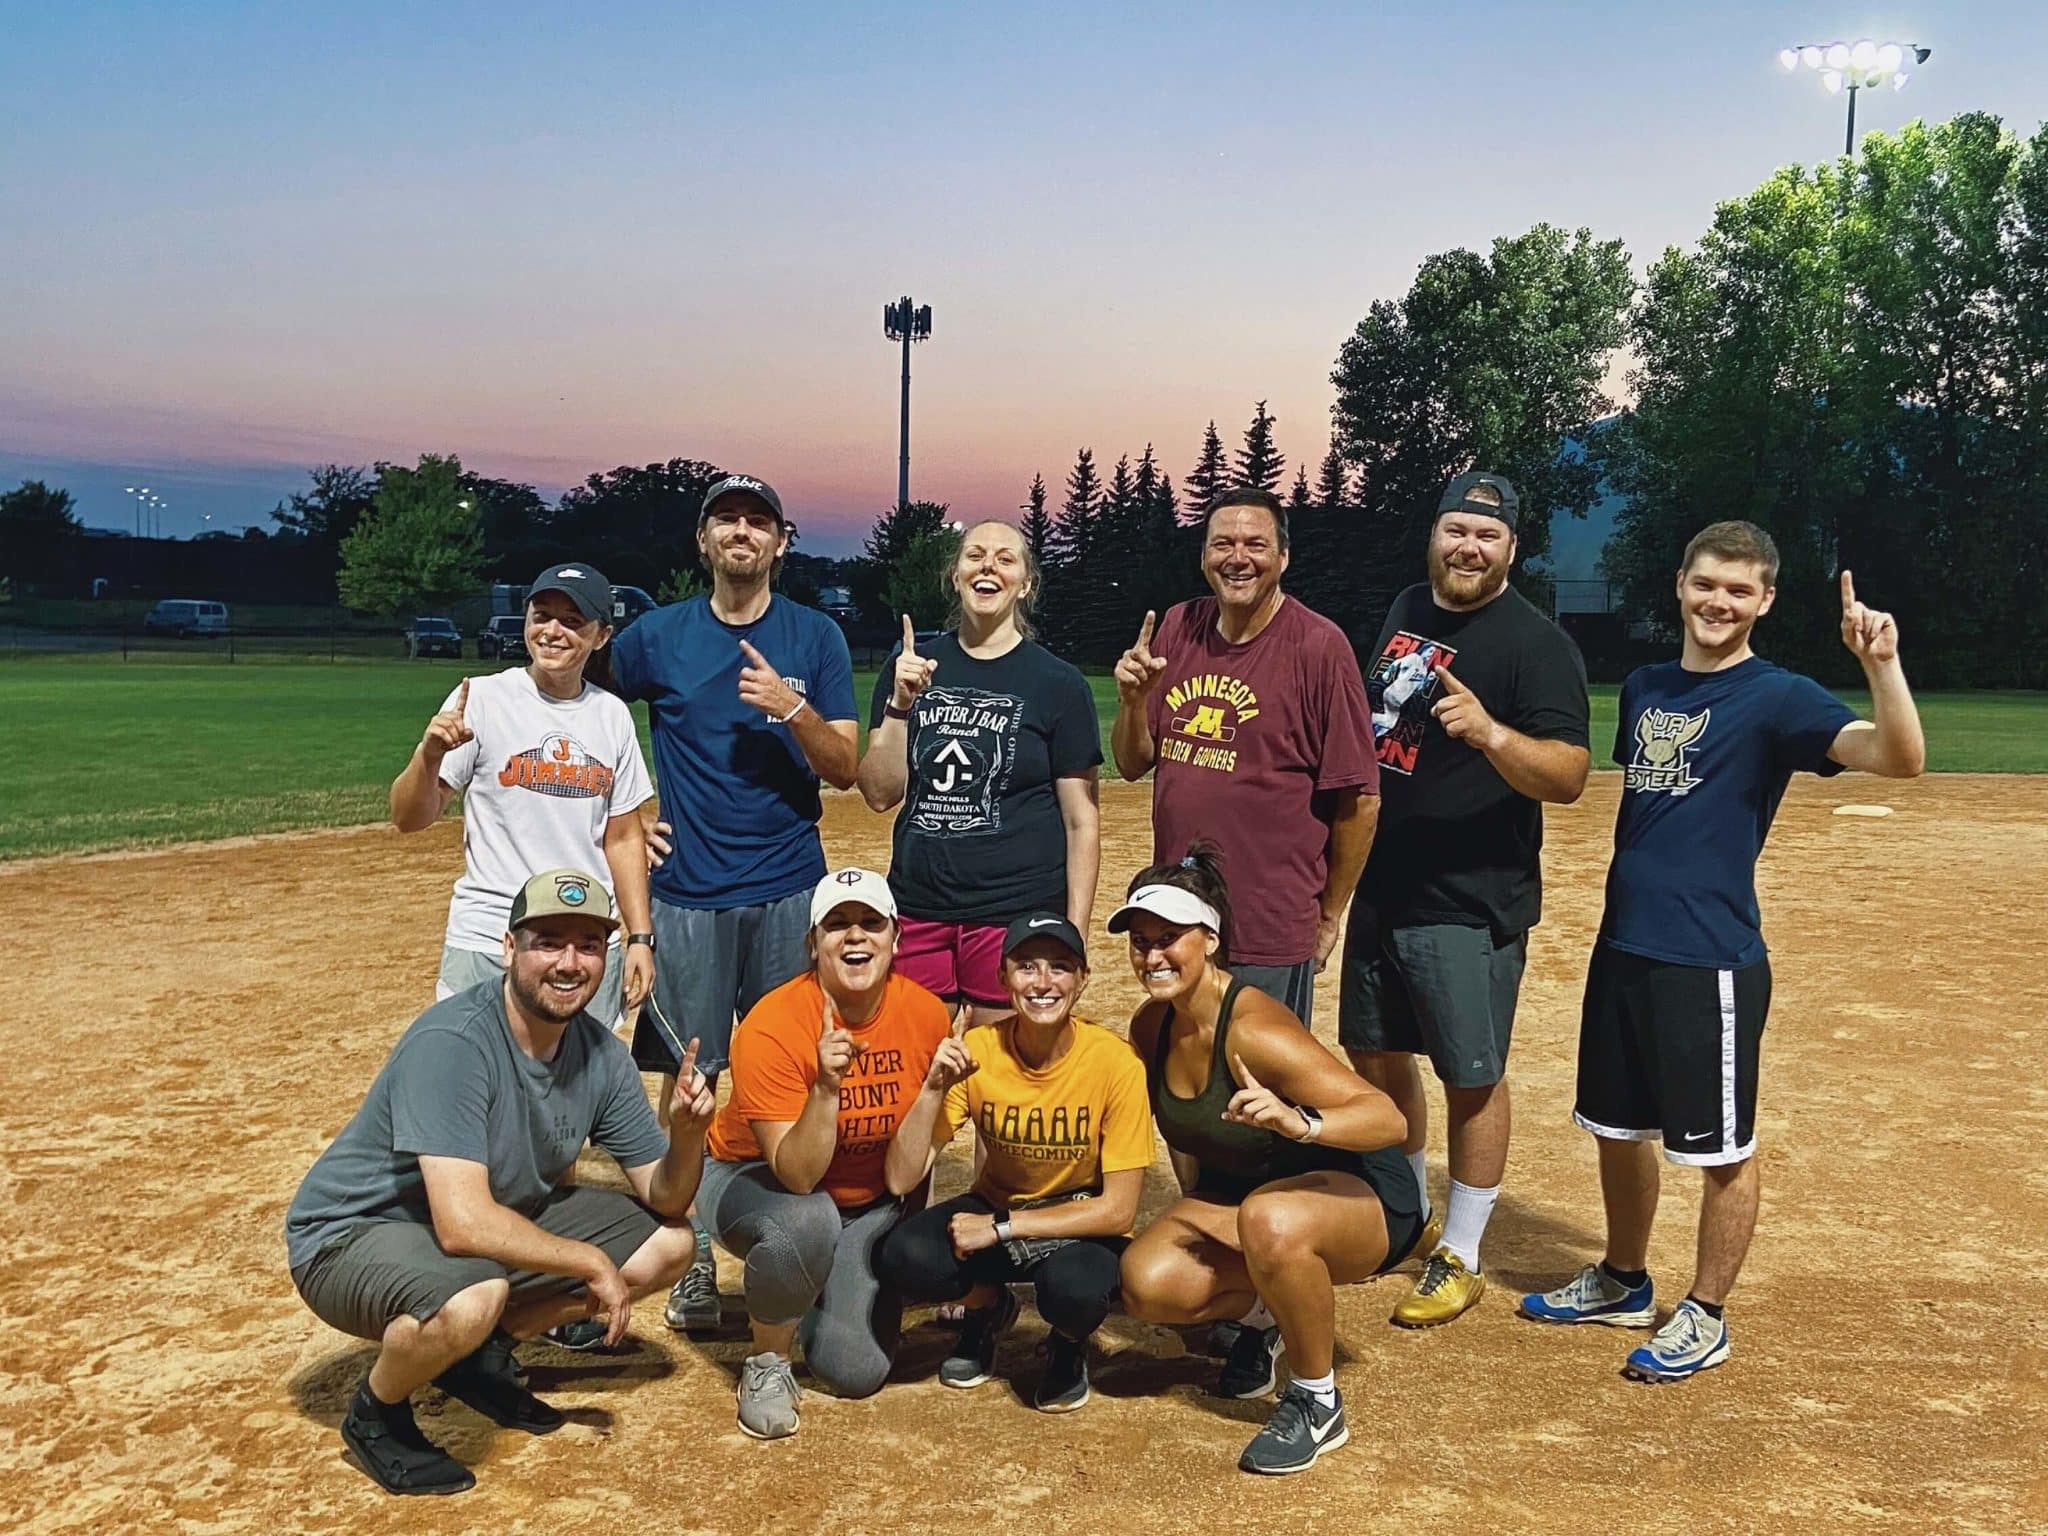 Twin Cities employees celebrated their softball league championship.